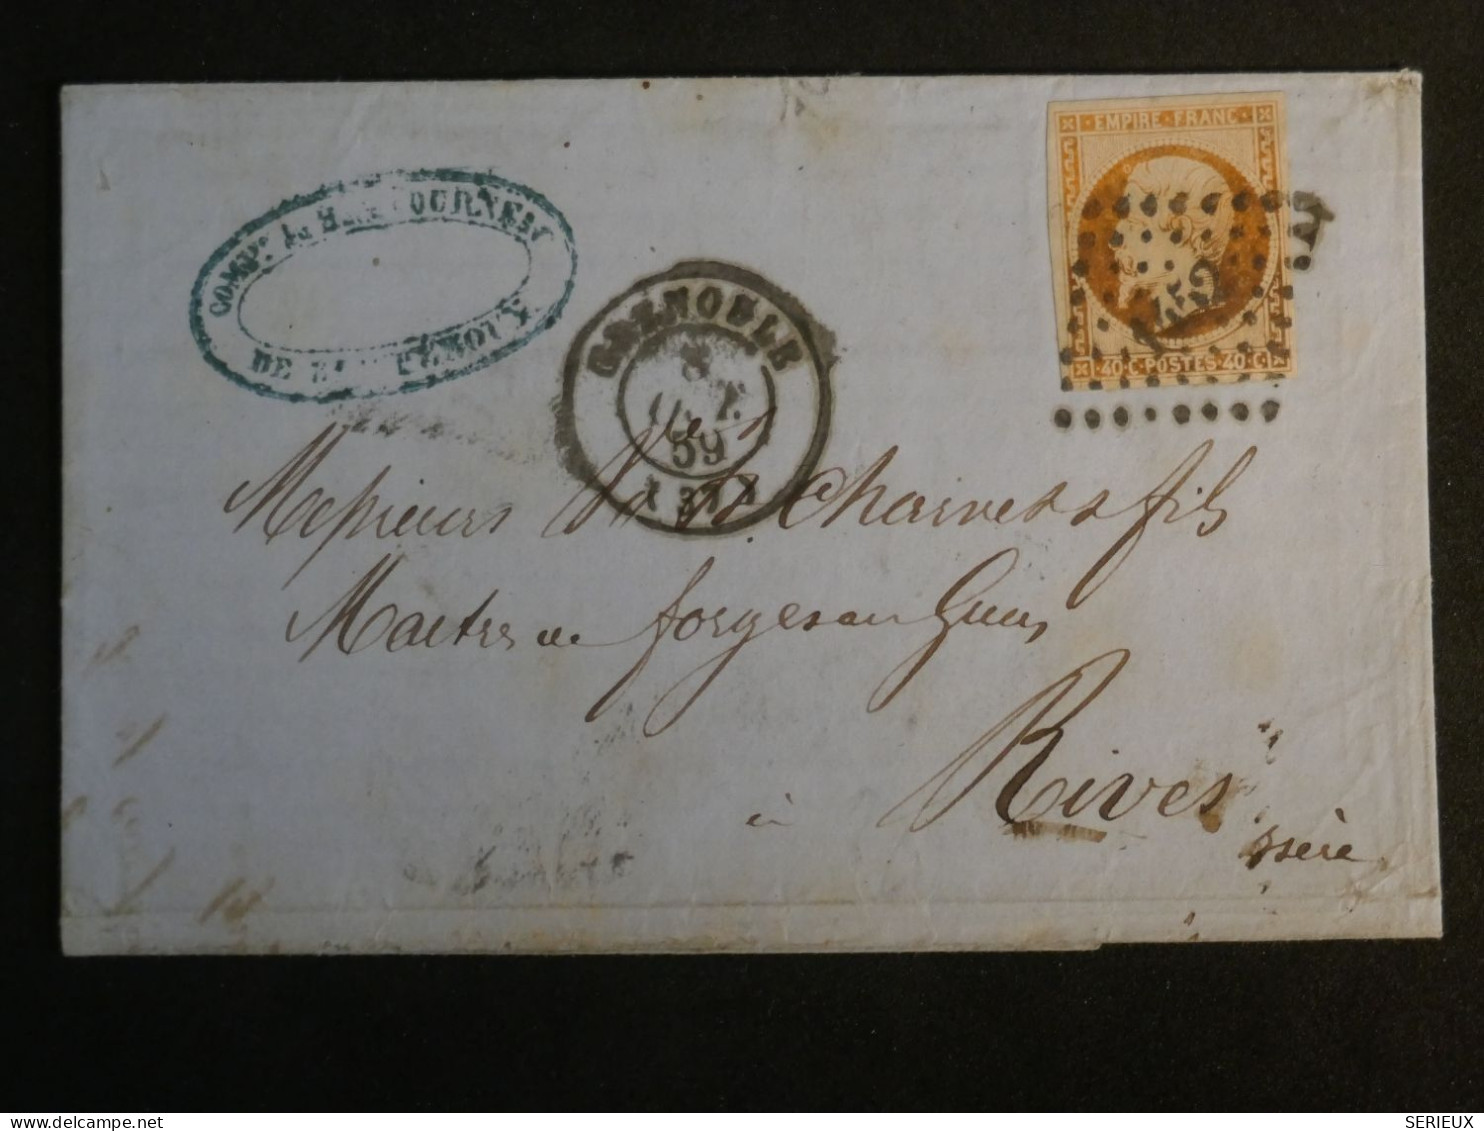 DN5  FRANCE LETTRE  1859  GRENOBLE A RIVES ISERE +NAP. 40C + AFFRANCH INTERESSANT - 1853-1860 Napoleone III